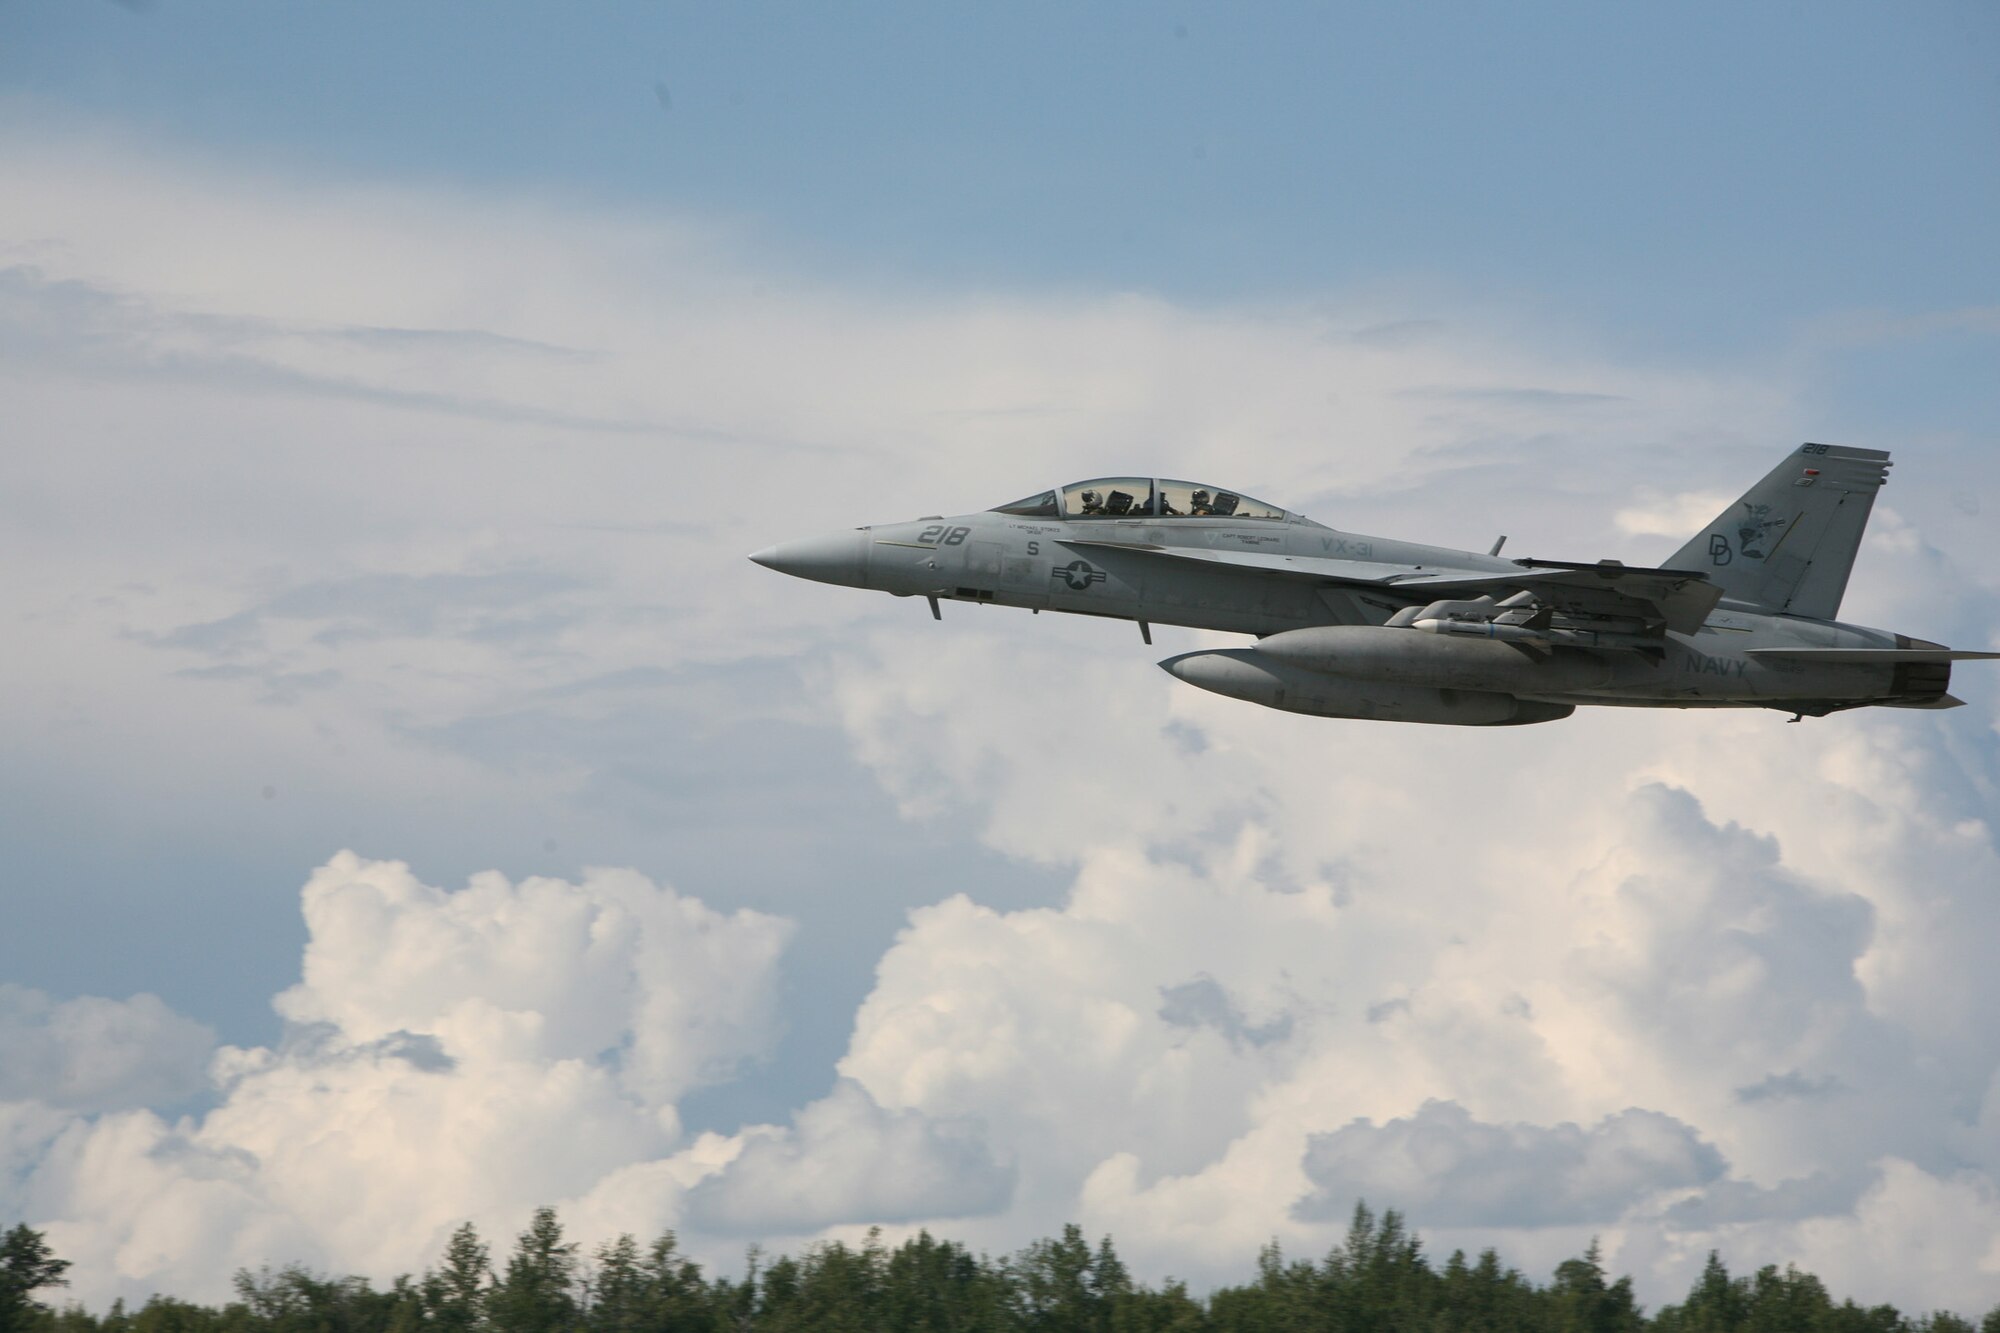 ELMENDORF AIR FORCE BASE, Alaska -- A Navy F/A-18F Super Hornet, flown by Air Test and Evaluation Squadron 31, takes off from the flightline here during the first day of Northern Edge 2009, June 15. Northern Edge is the largest military training exercise in Alaska. (U.S. Air Force photo/Marine Corps Sgt. Zachary Dyer)